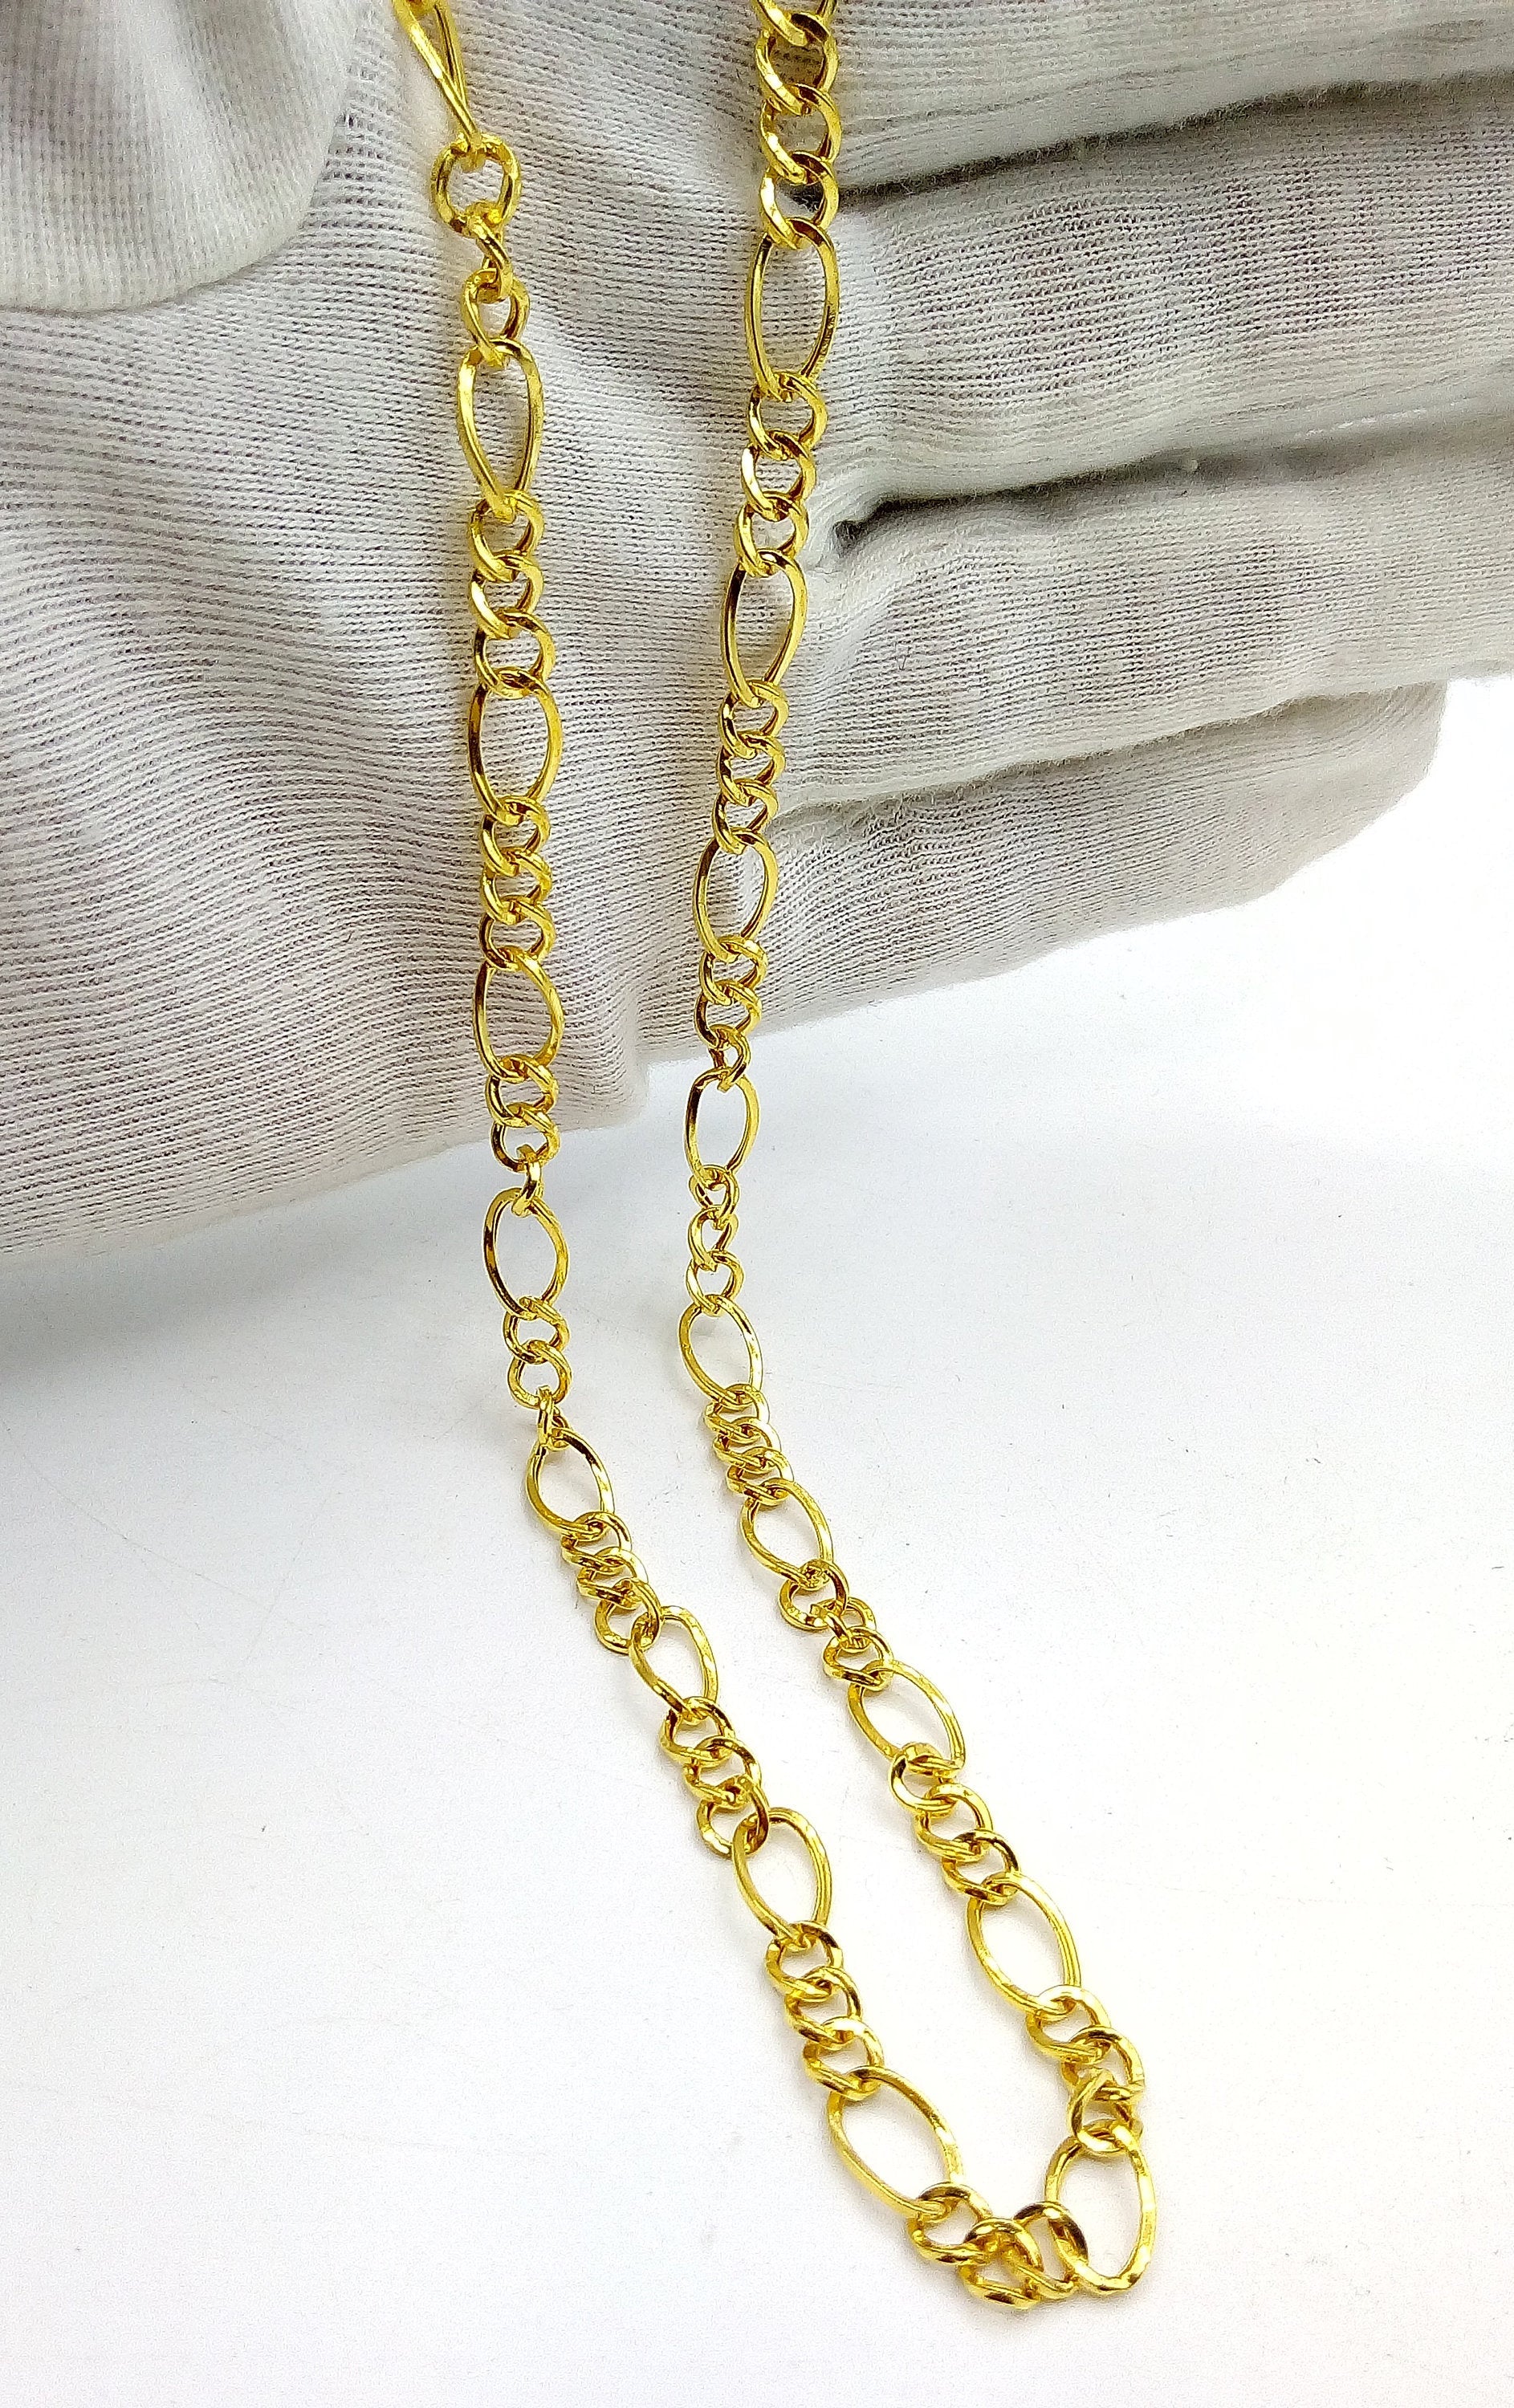 22kt yellow gold handmade fabulous light weight chain necklace unisex gifting figaro link chain certified royal india made chain necklace - TRIBAL ORNAMENTS